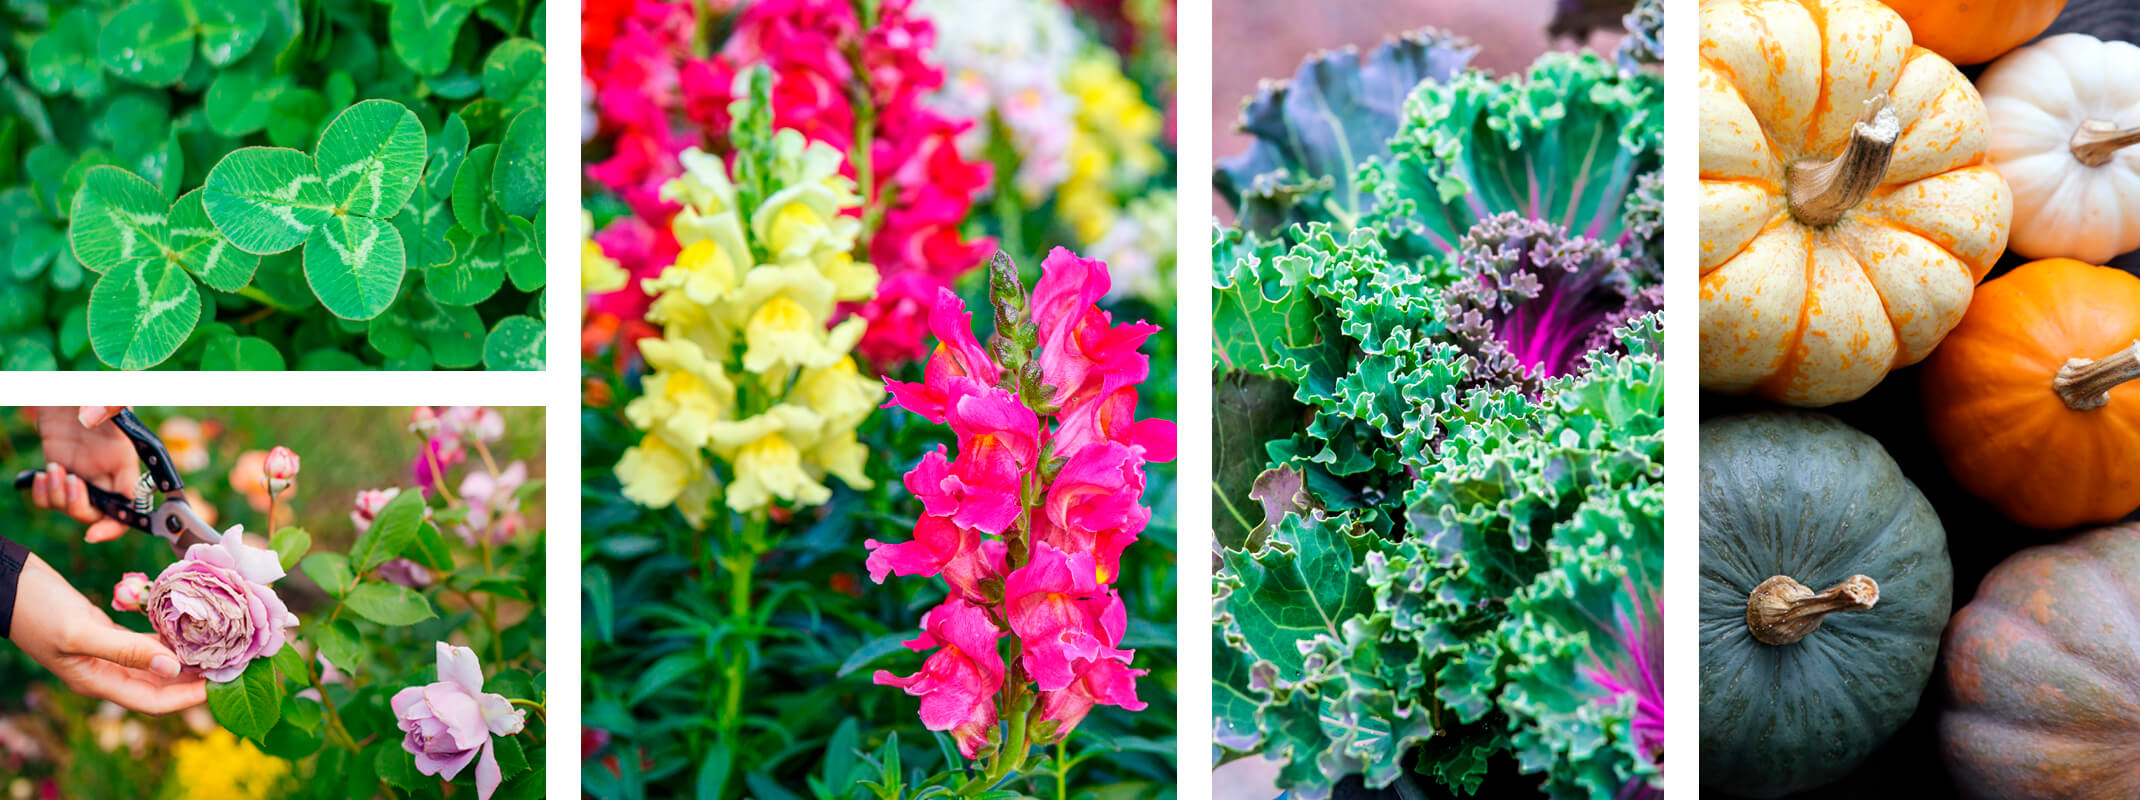 images of clover and alfalfa, snapdragons, kale and pumpkins